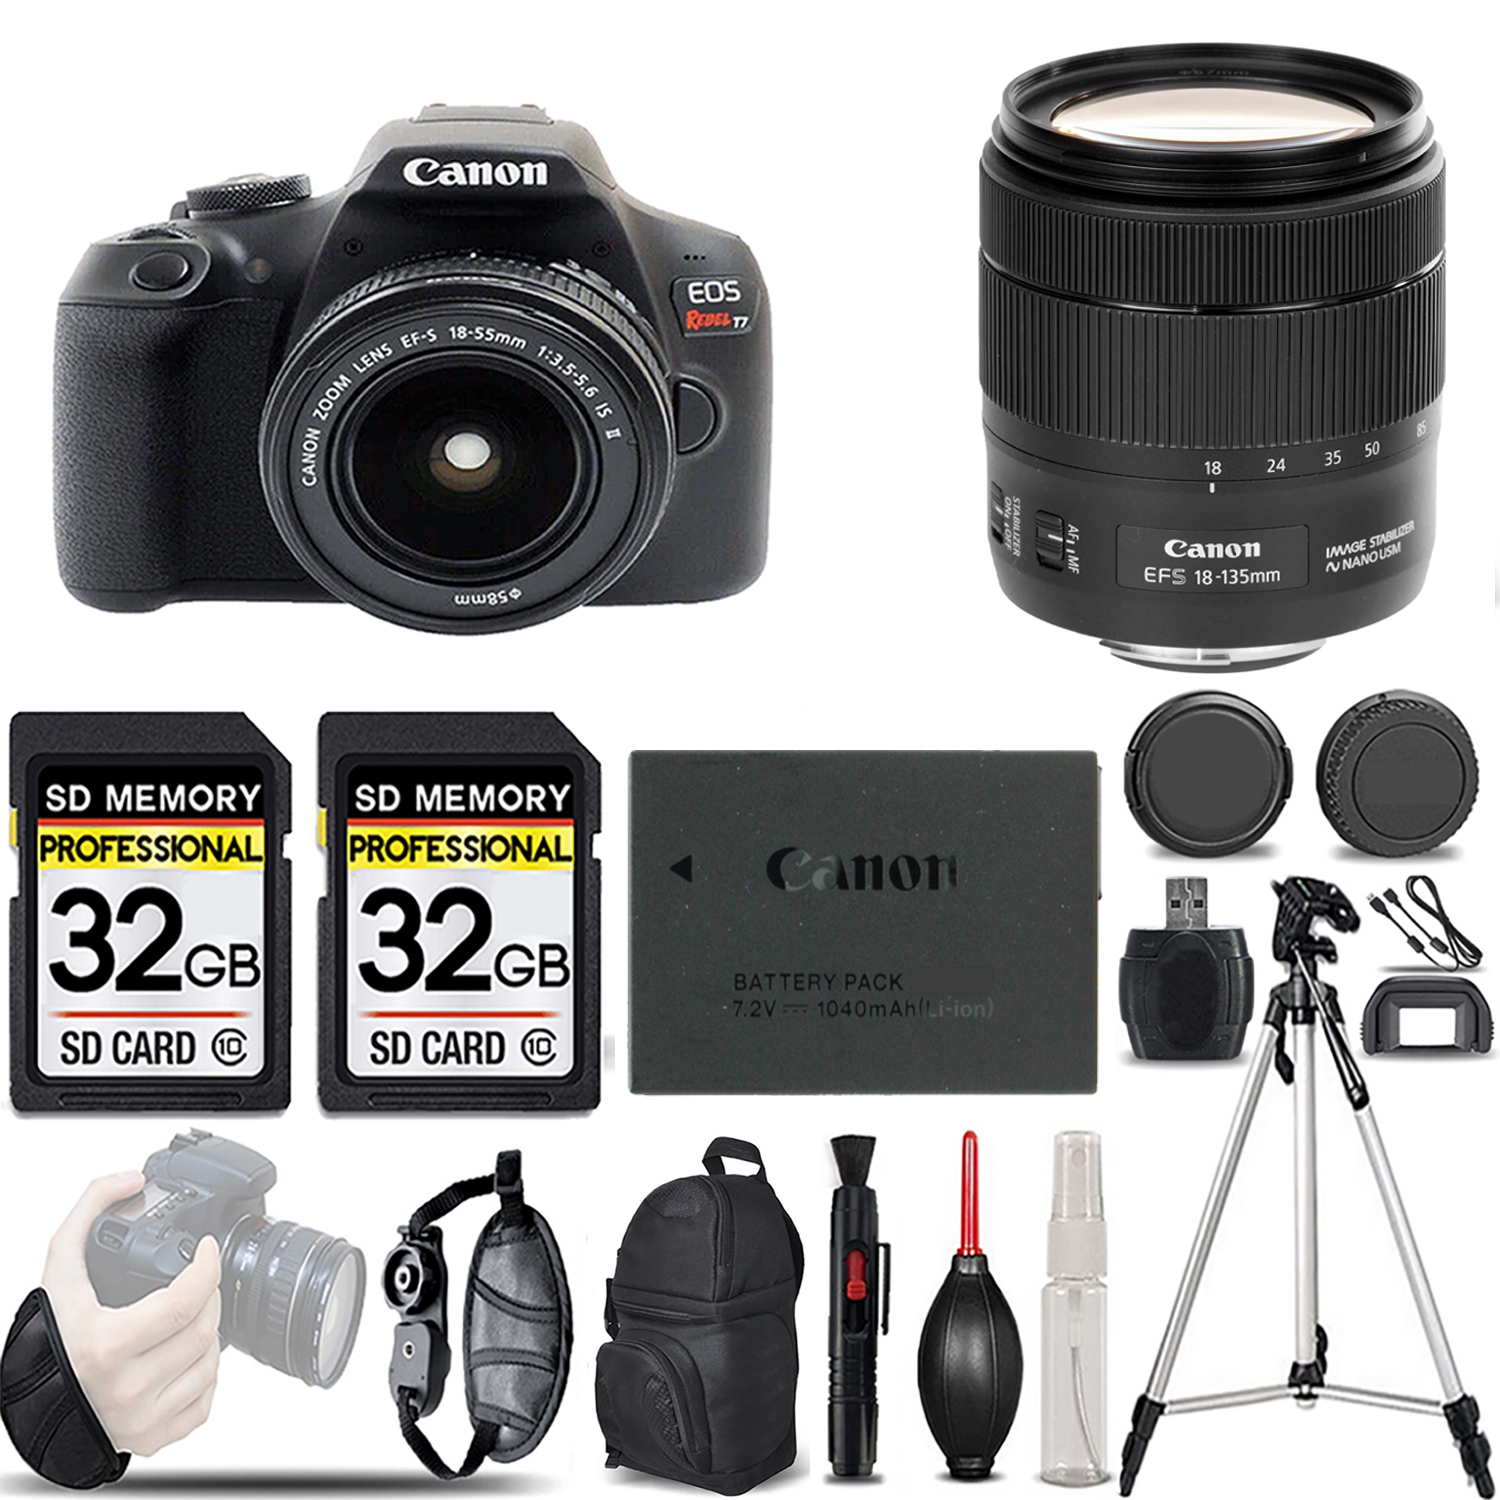 EOS Rebel T7 with 18-55mm Lens + 18-135mm f/3.5-5.6 IS USM Lens - LOADED KIT *FREE SHIPPING*